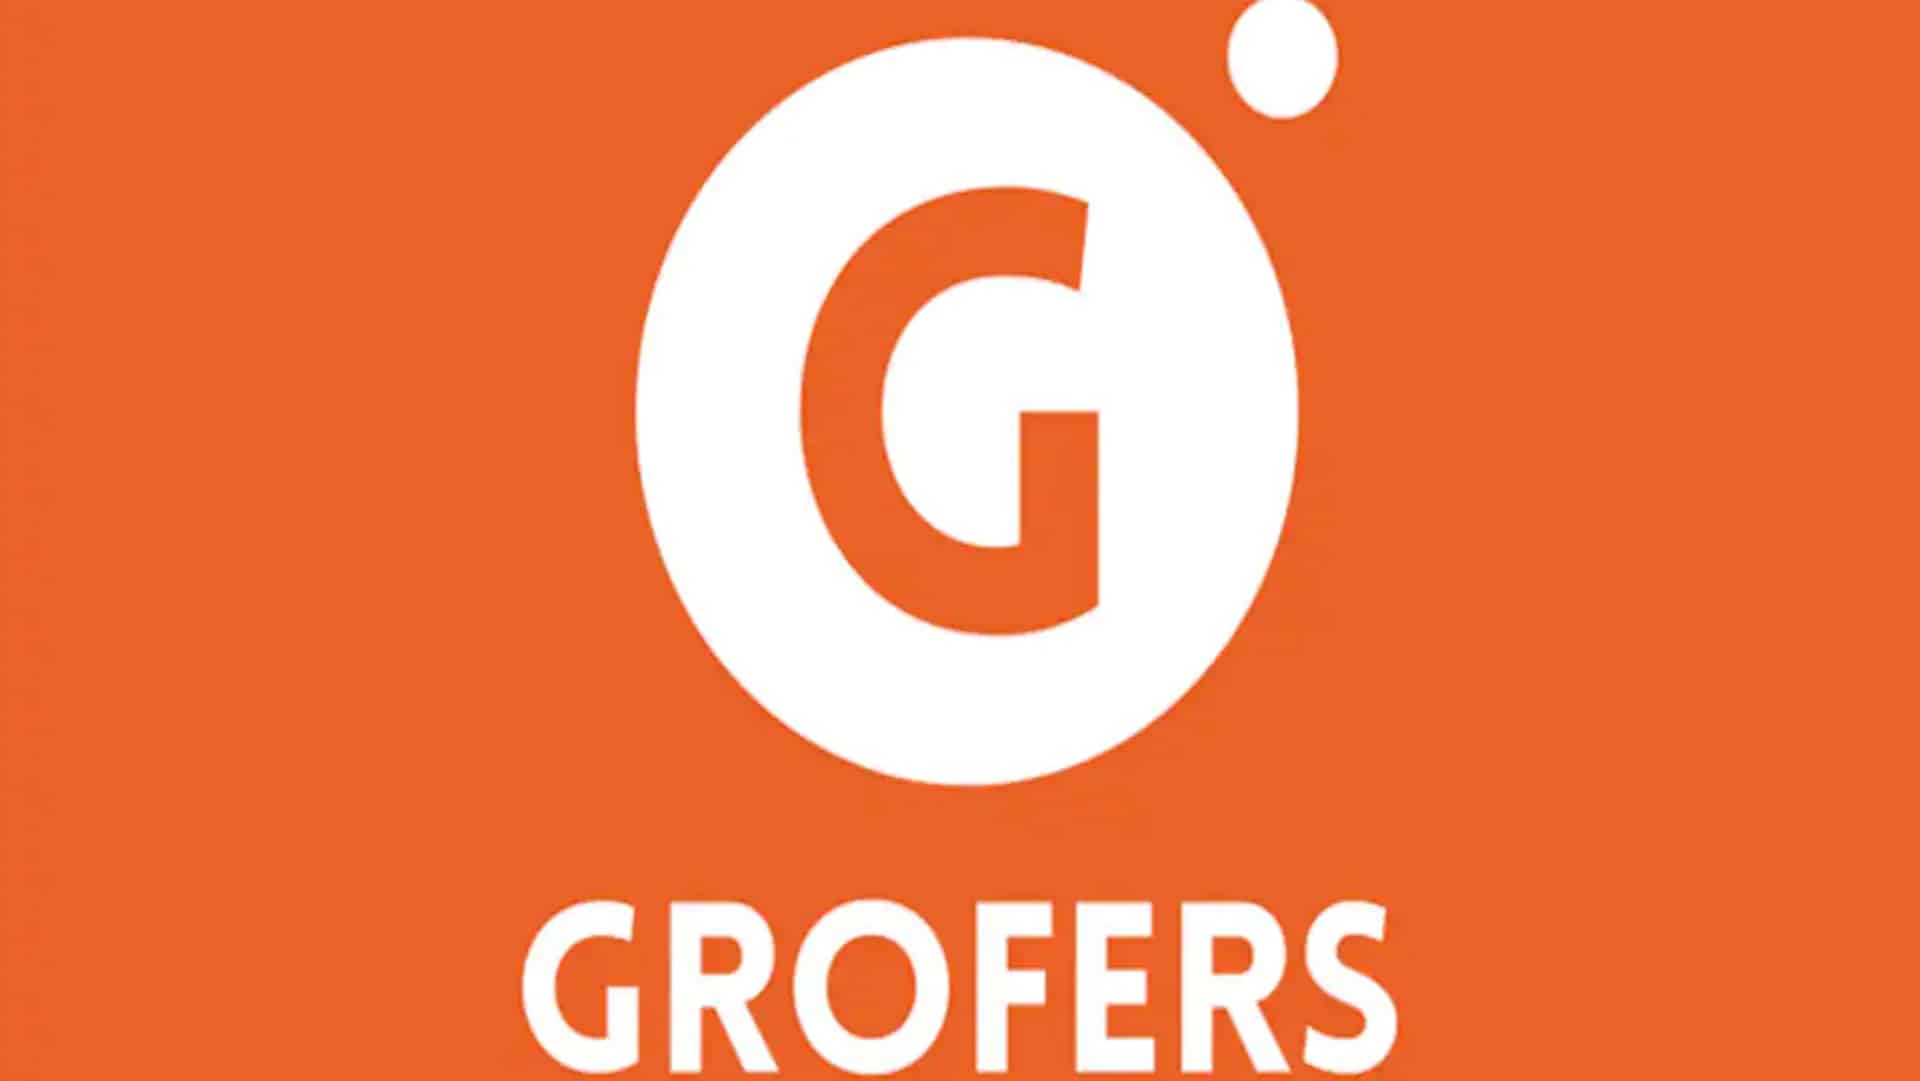 Continue to look for entrepreneurs keen to build biz in instant commerce: Grofers